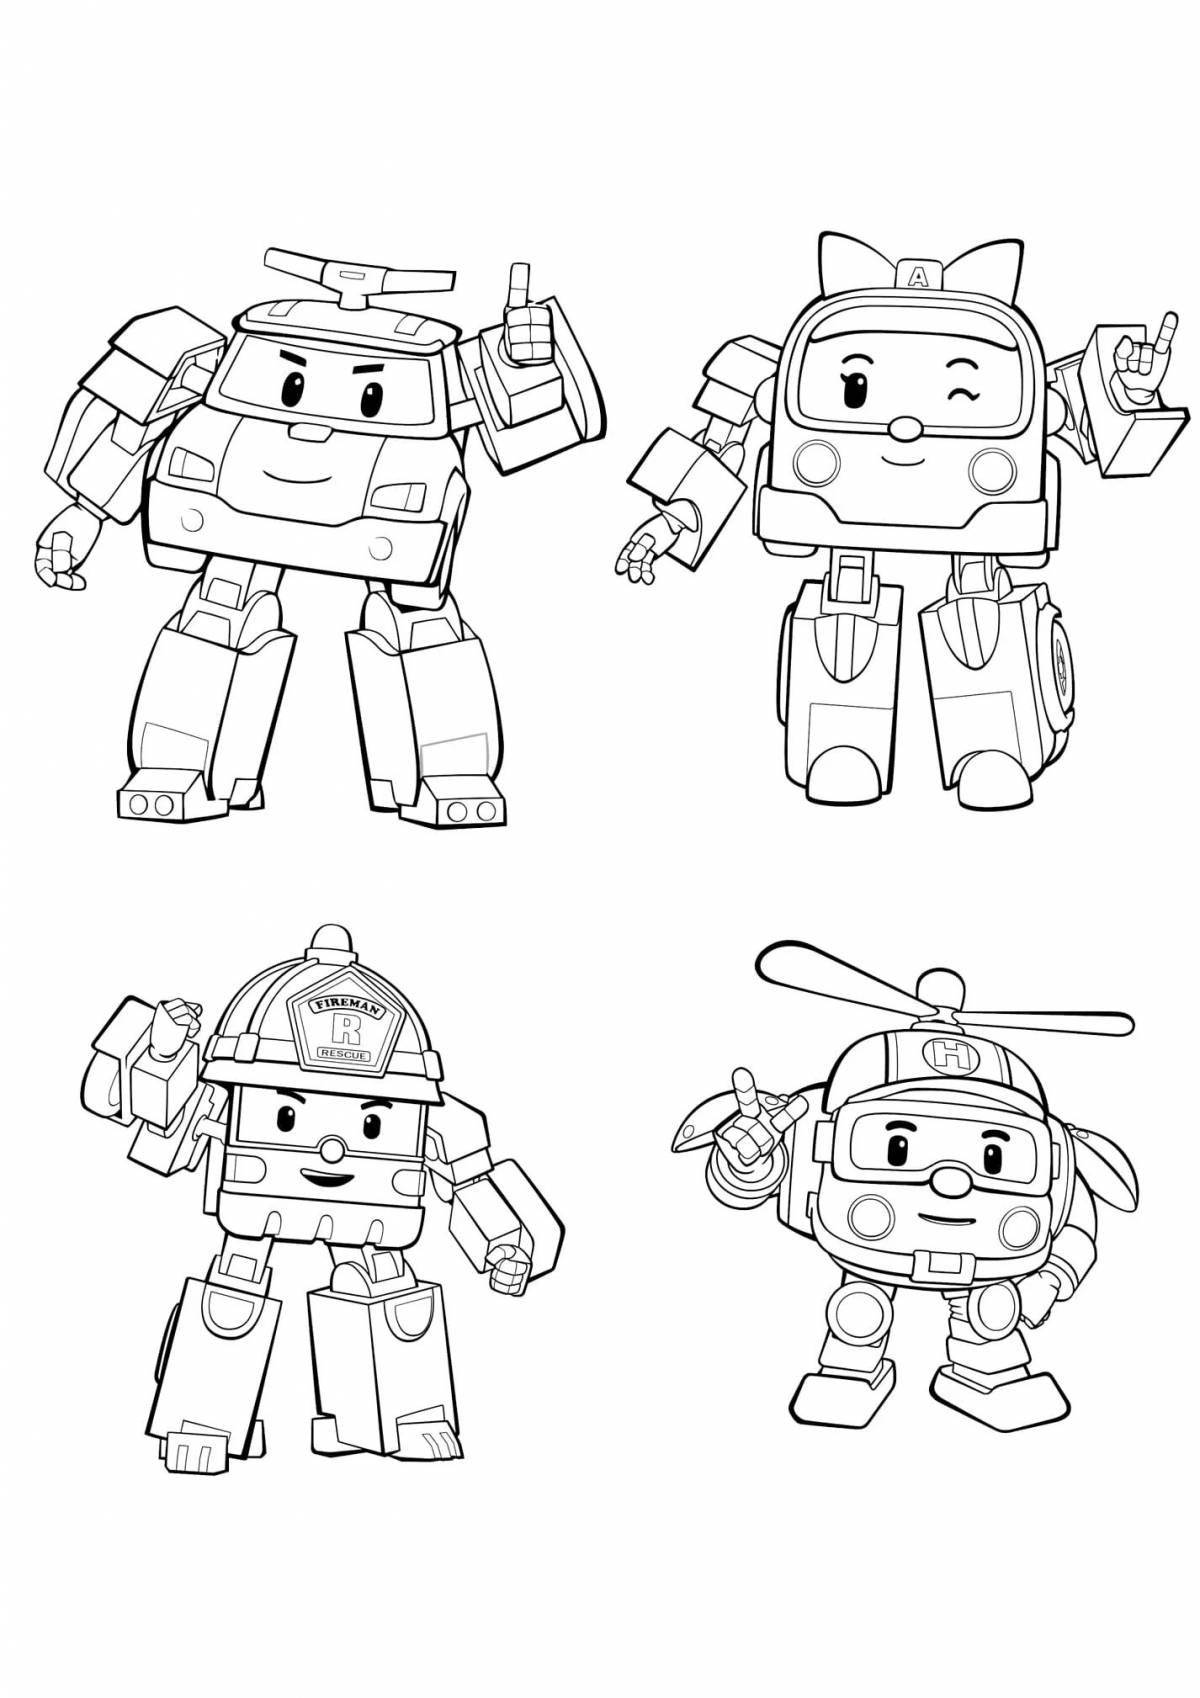 Fun robot poly coloring page